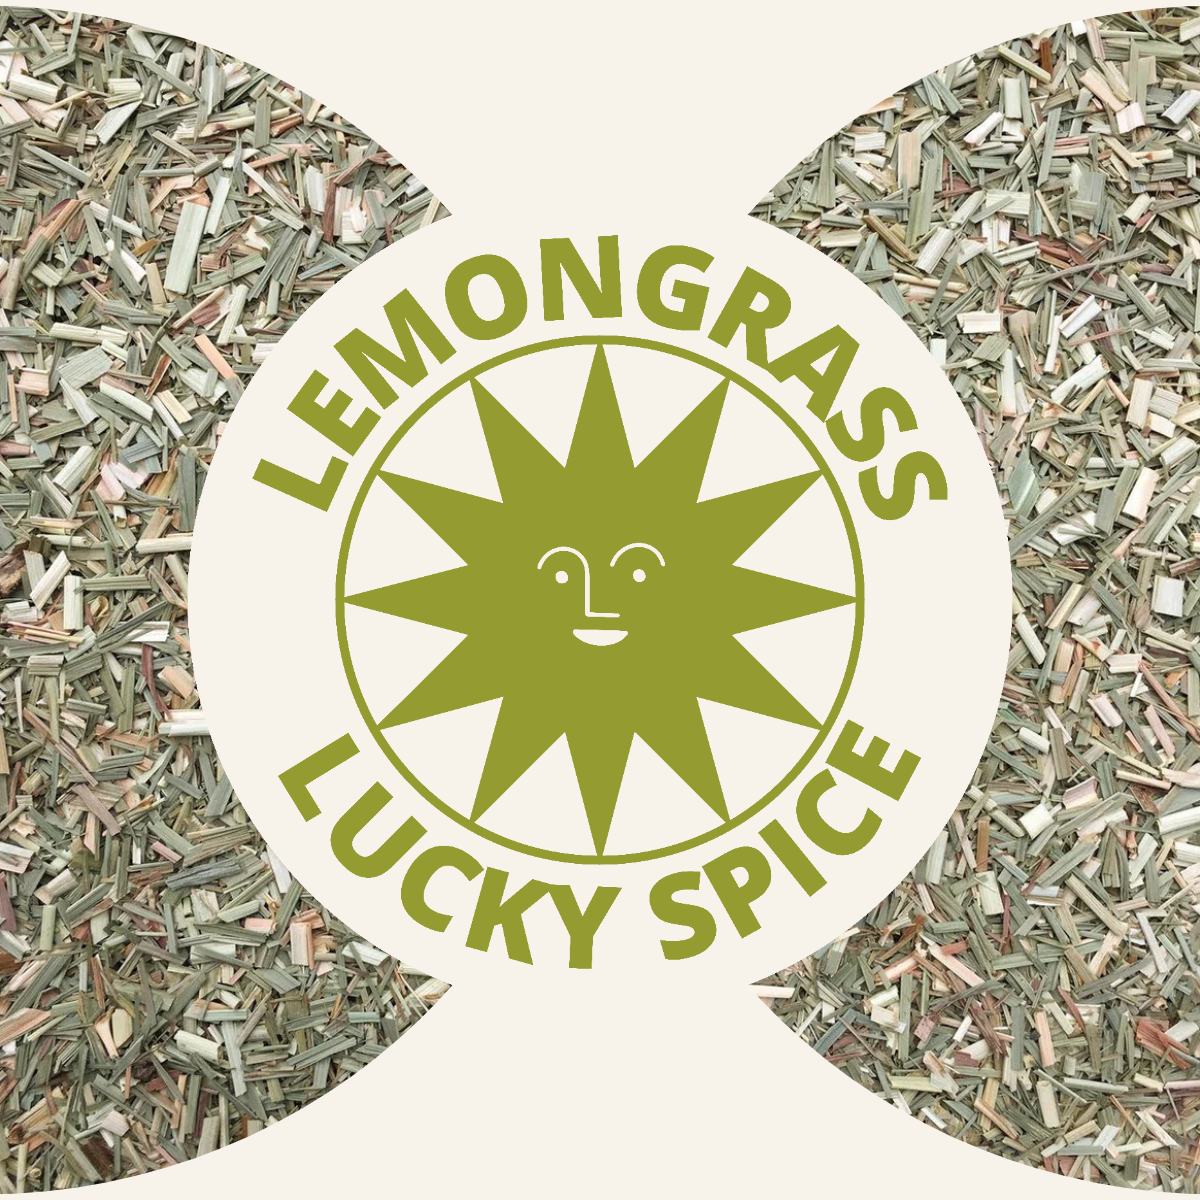 Organic Lemongrass from Egypt, packaged by Lucky Spice on the South Shore of Nova Scotia. Shipping across Canada